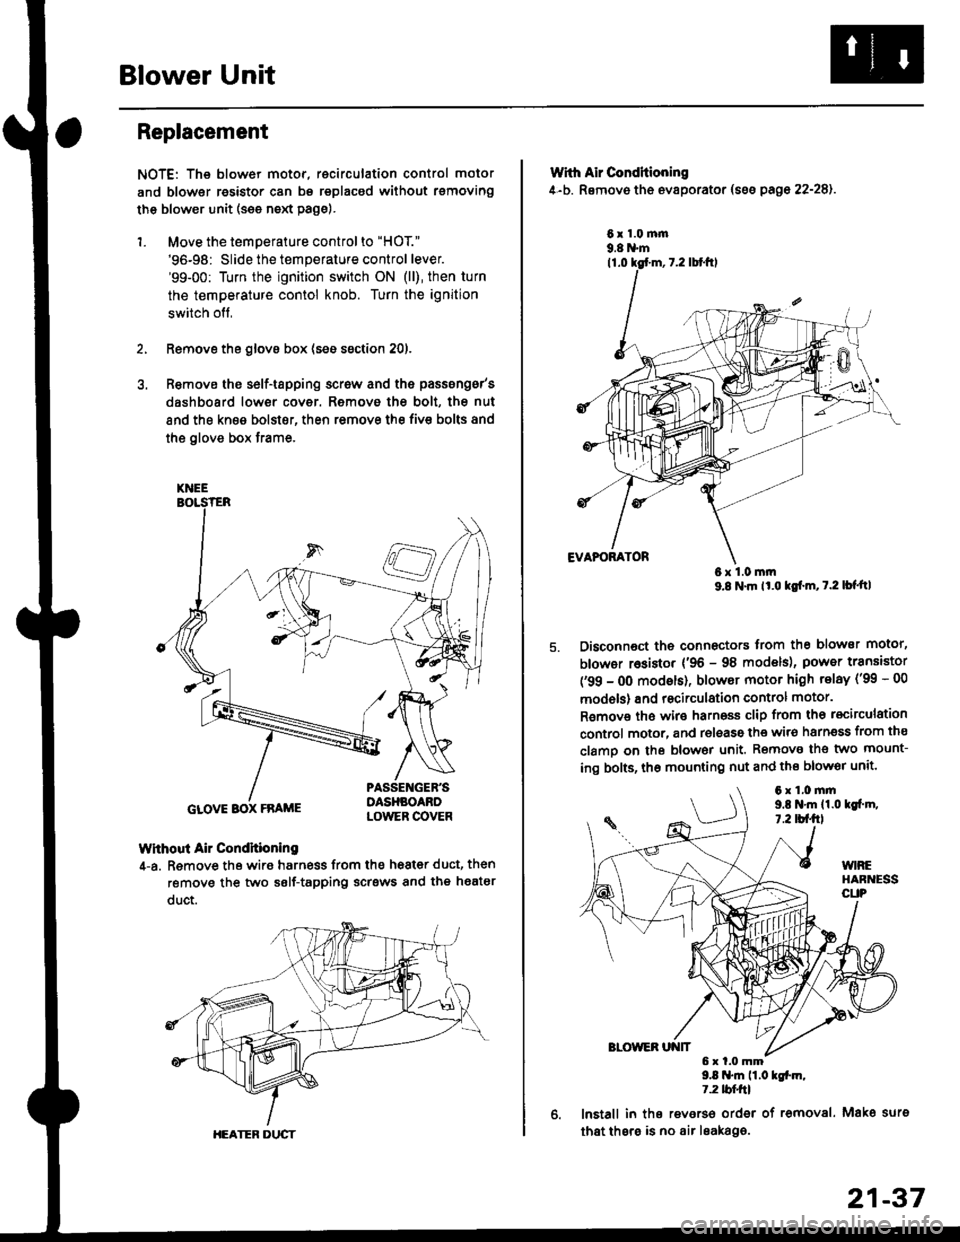 HONDA CIVIC 2000 6.G Workshop Manual Blower Unit
Replacement
NOTE: The blower motor, recirculation control motor
and blower resistor can bs replacsd without rsmoving
th€ blower unit (see neld Page).
1. Move the temperature control to "